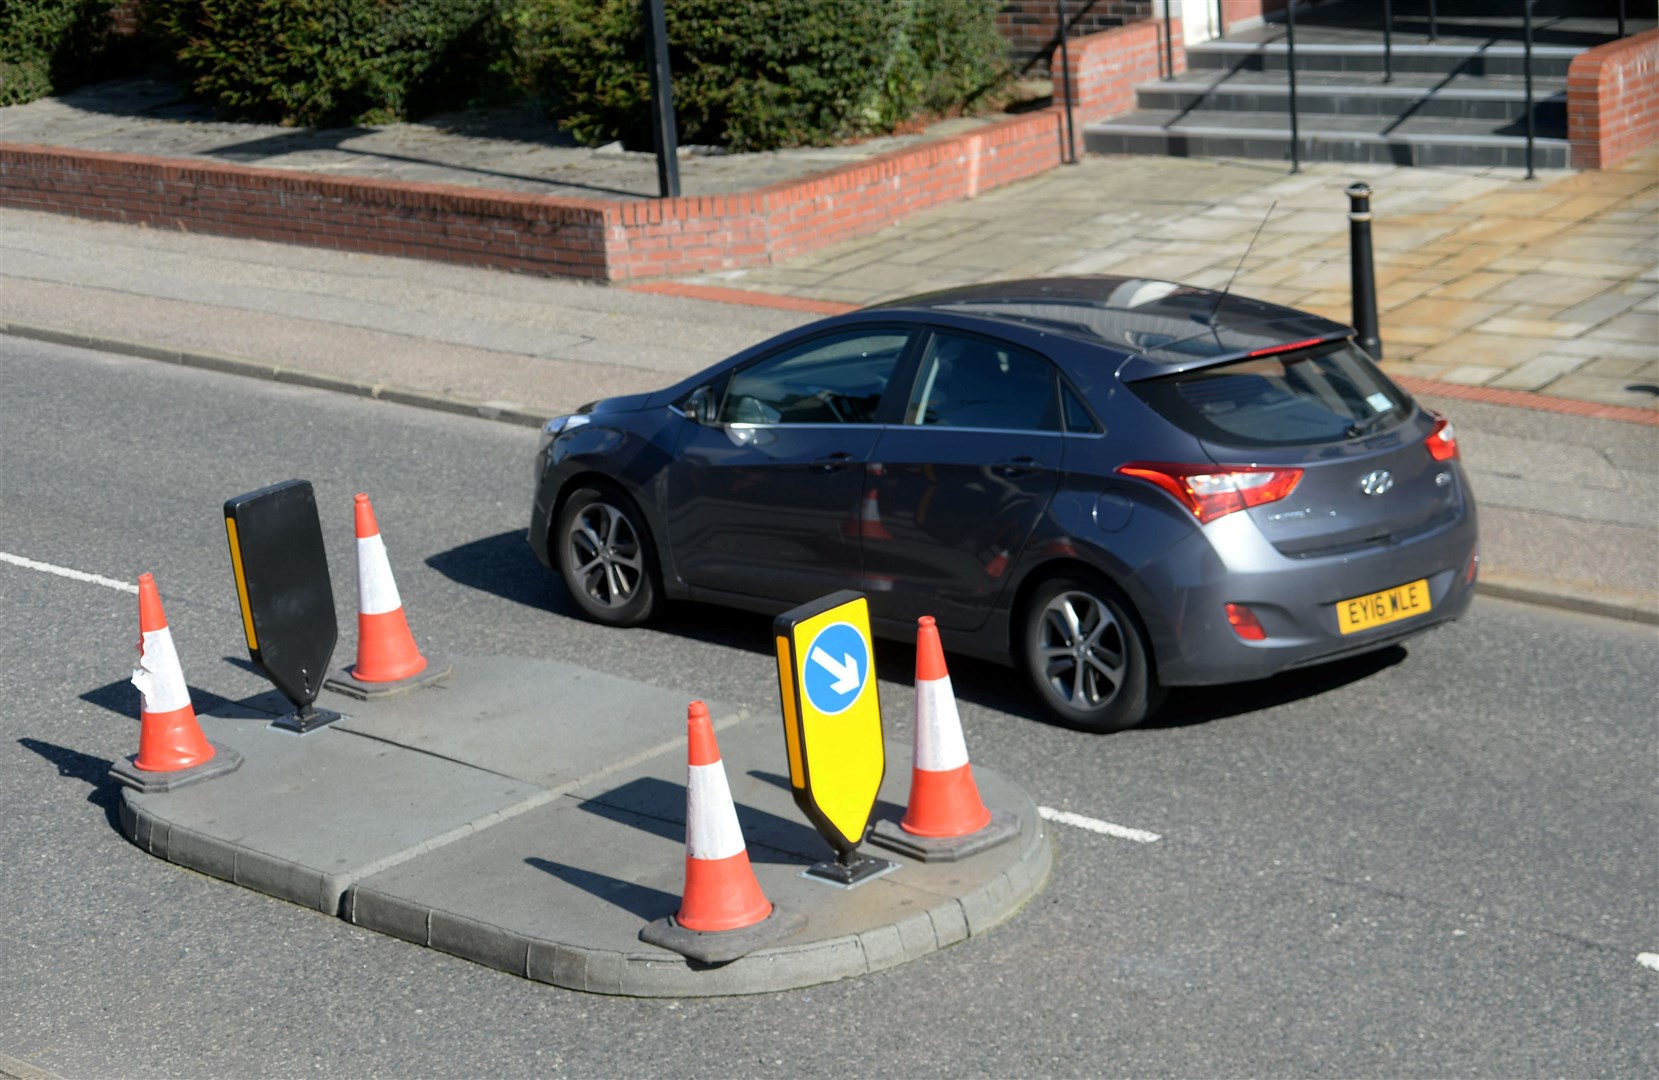 A traffic island placed opposite the police station in Dingwall has also proved contentious with some motorists concerned about its potential impact on gridlock situations. Picture: Callum Mackay